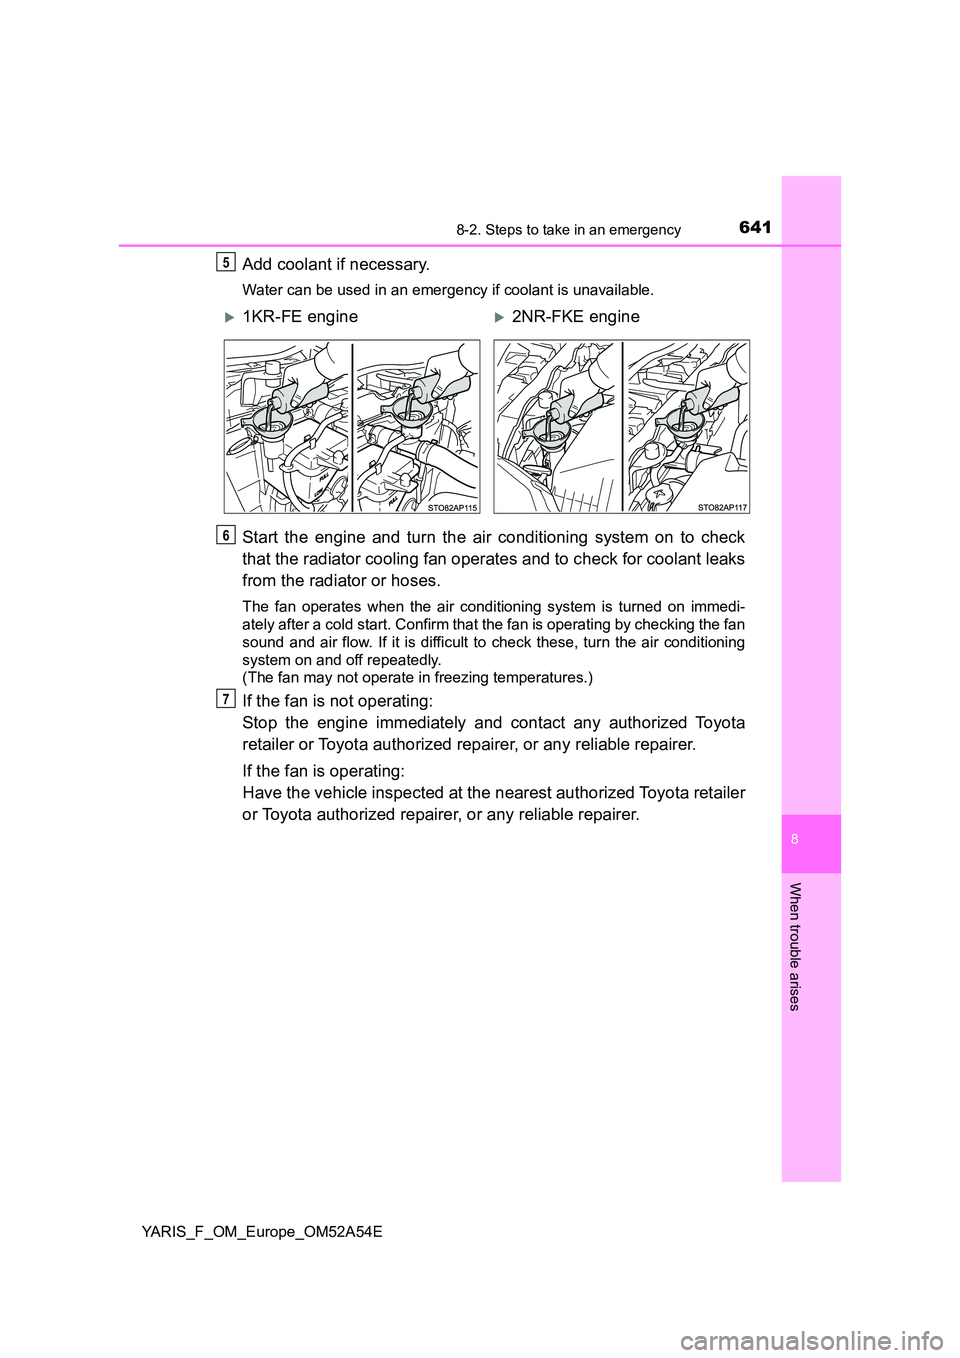 TOYOTA YARIS 2020  Owners Manual 6418-2. Steps to take in an emergency
8
When trouble arises
YARIS_F_OM_Europe_OM52A54E
Add coolant if necessary.
Water can be used in an emergency if coolant is unavailable.
Start the engine and turn 